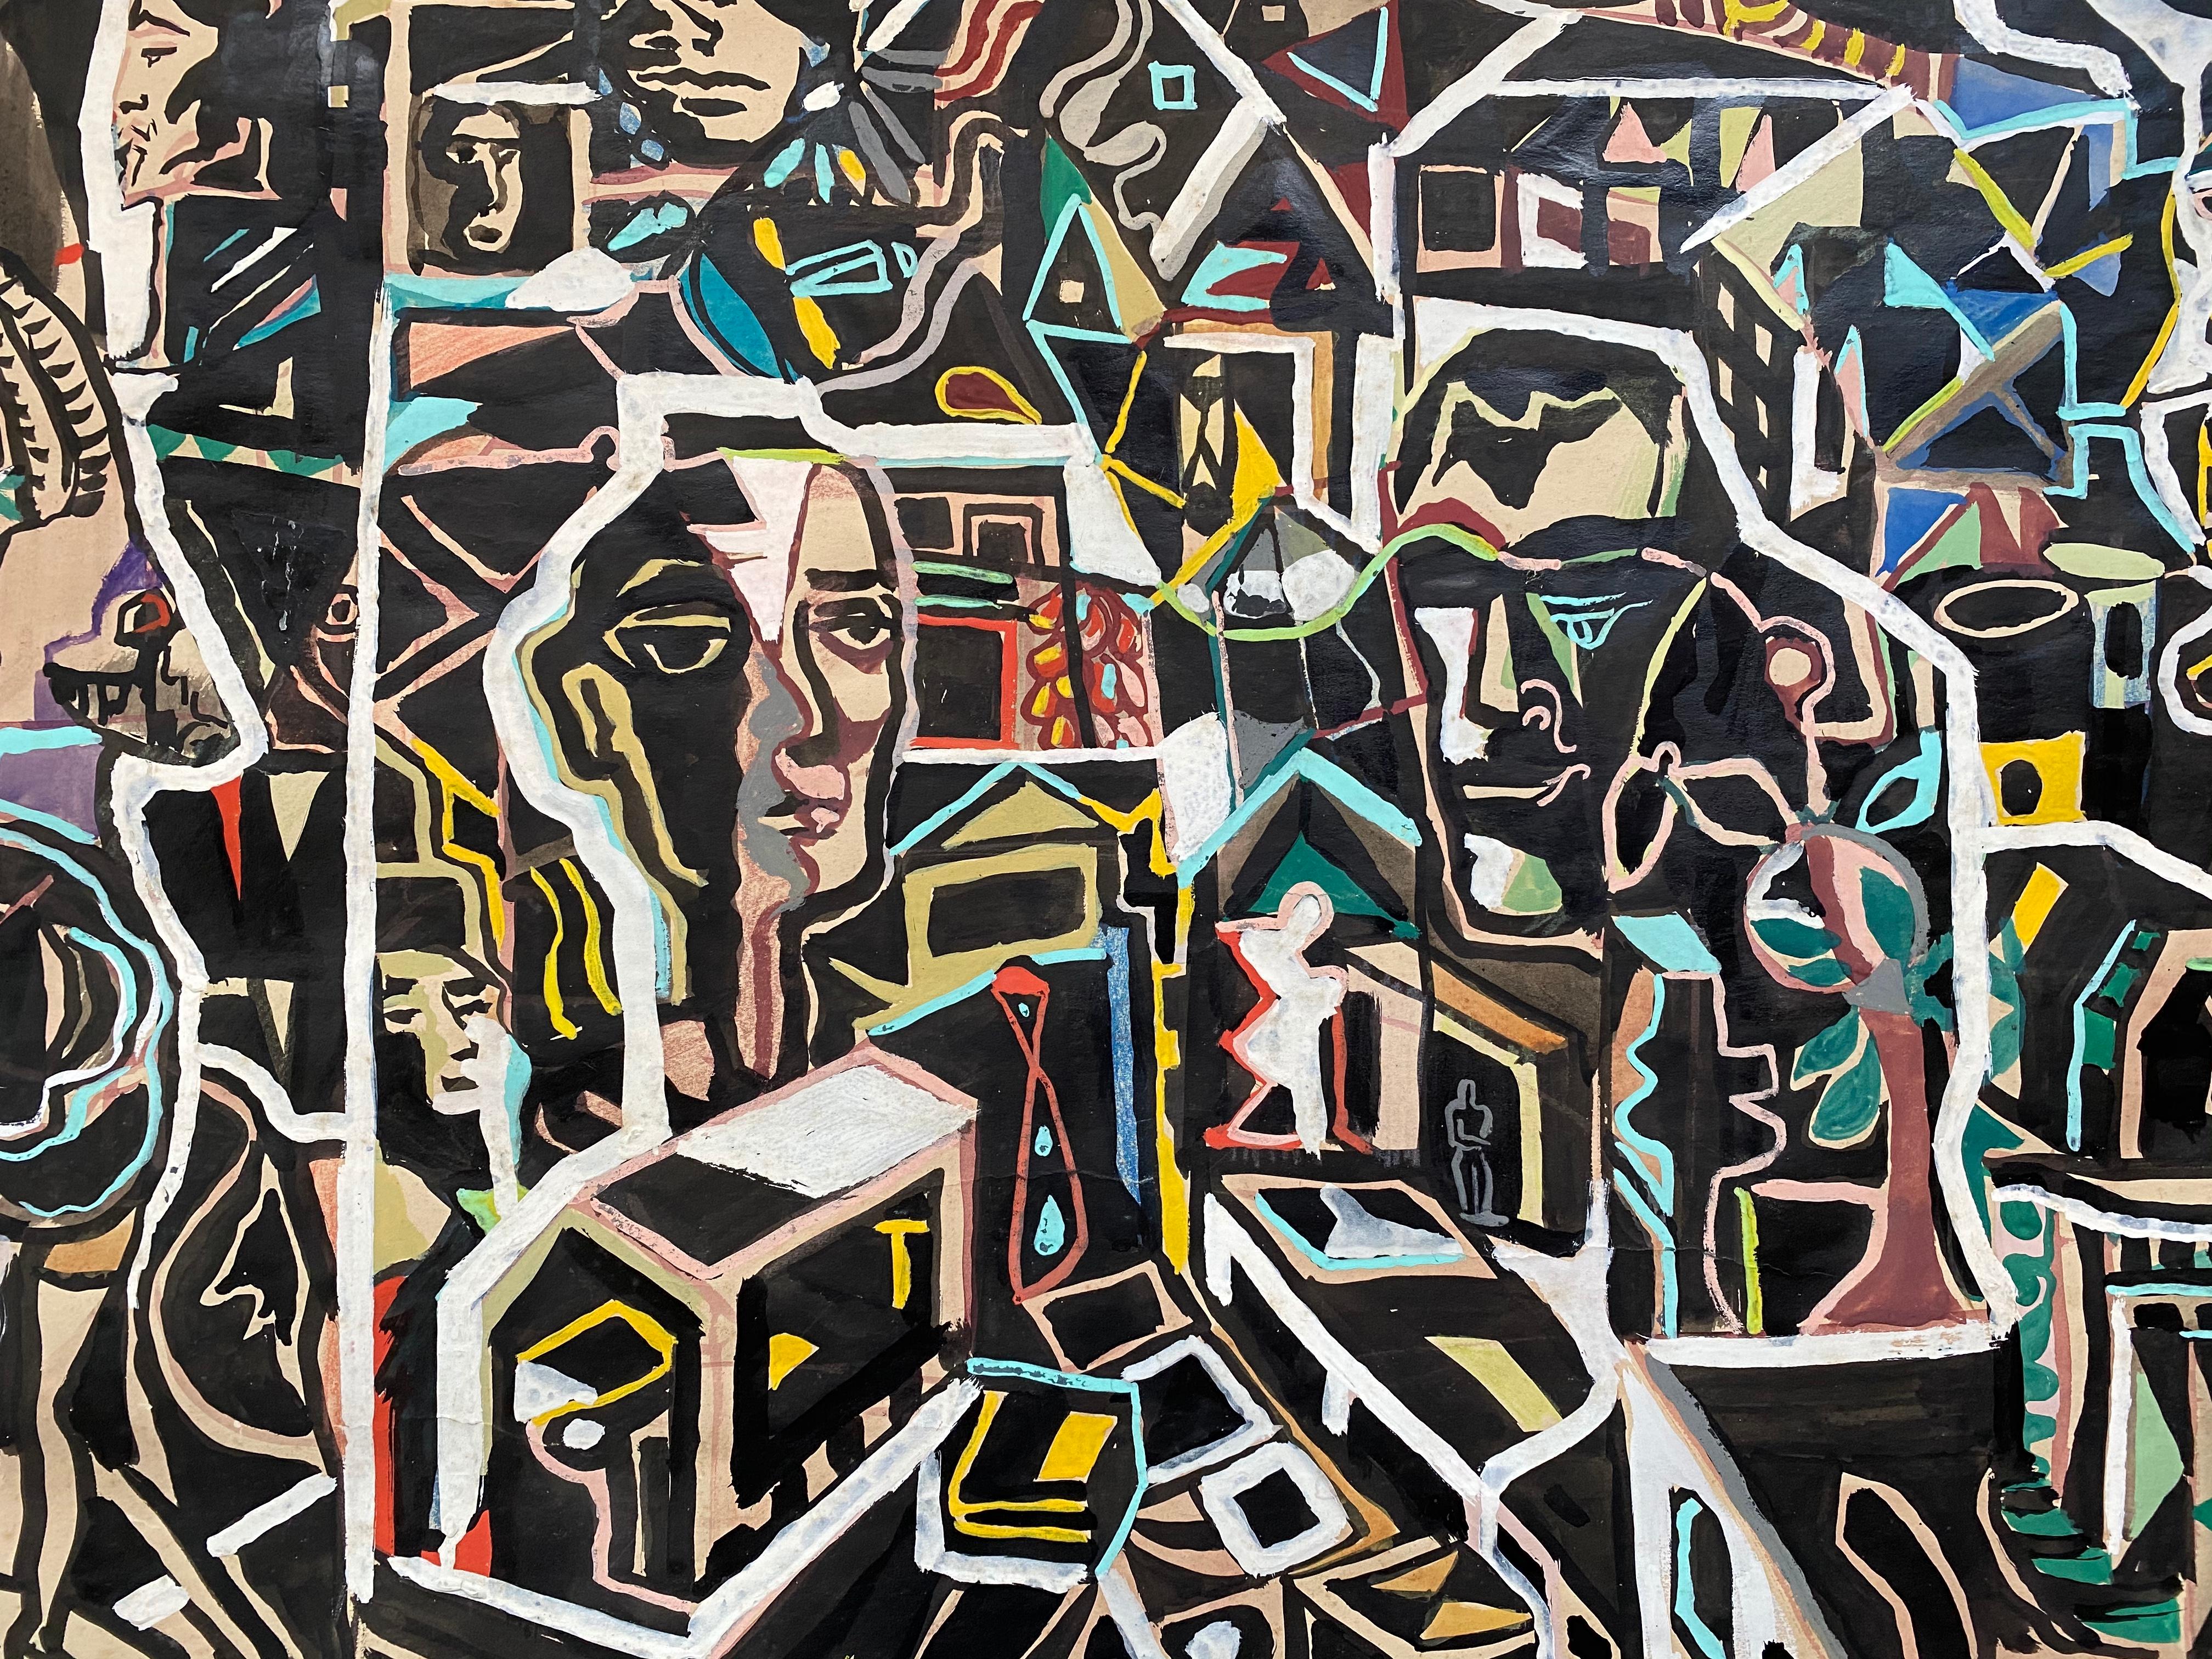 Elaborate and highly detailed mixed media painting of abstract figures in a matrix of shapes.  Signed and dated 1955 lower right.  Consists of watercolor, gouache with touches of crayon on paper. Condition is good. Matted but not framed.  

Neville